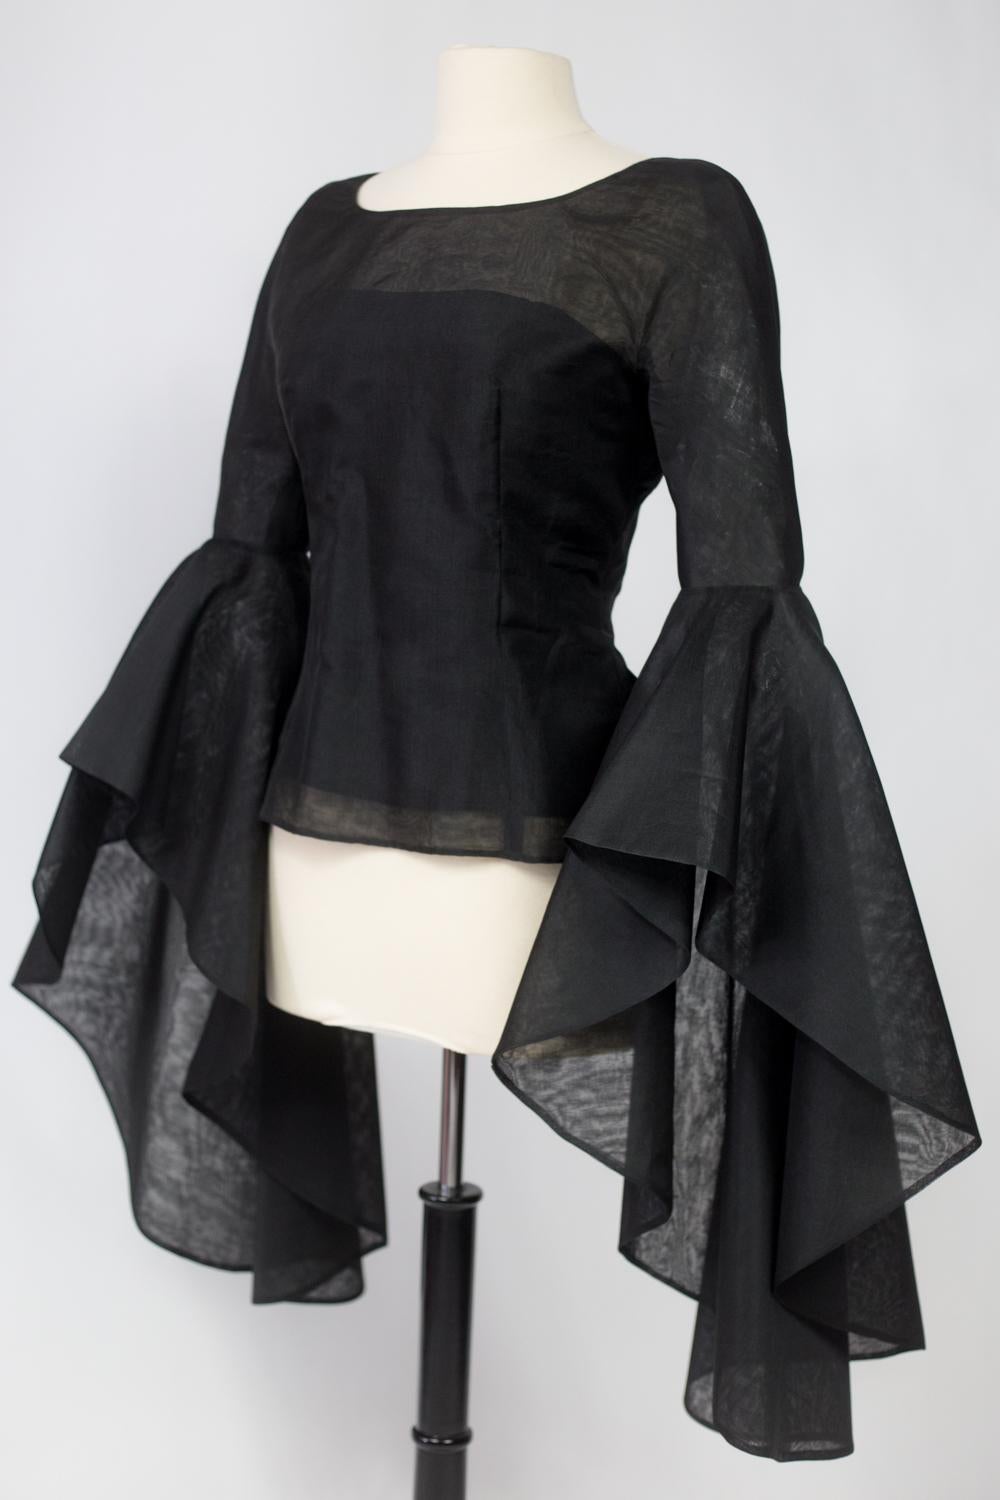 A Pierre Cardin Organza Blouse With Dramatic Batwing Sleeves Circa 1970/1980 In Good Condition For Sale In Toulon, FR